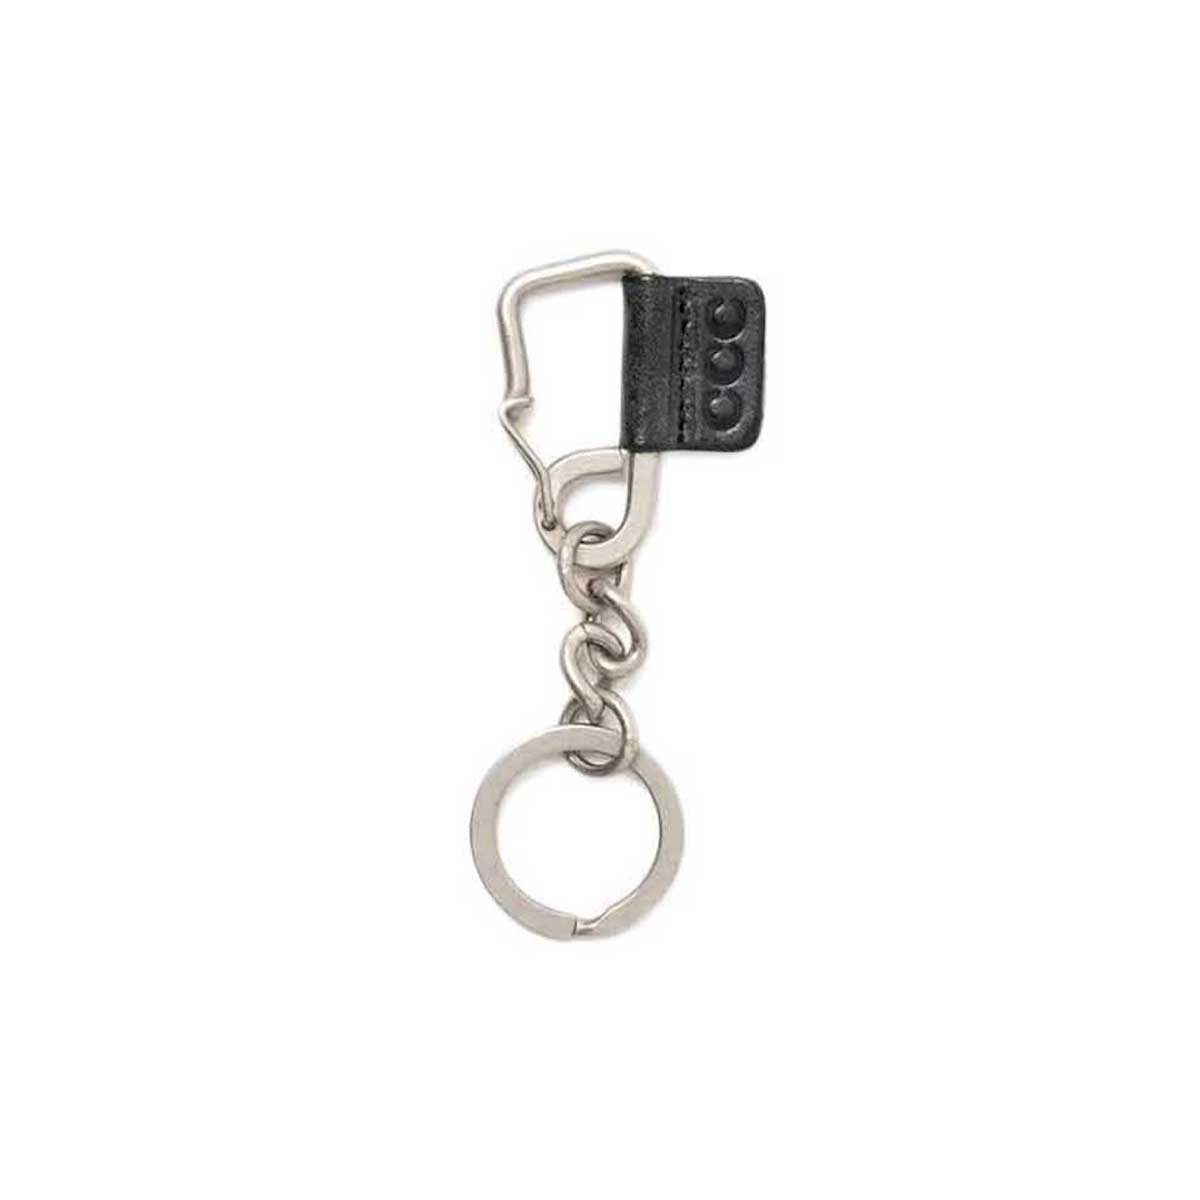 HOBO / HB-A4251 EVERYDAY CARABINER KEY CHAIN RING BRASS for CITY COUNTRY CITY